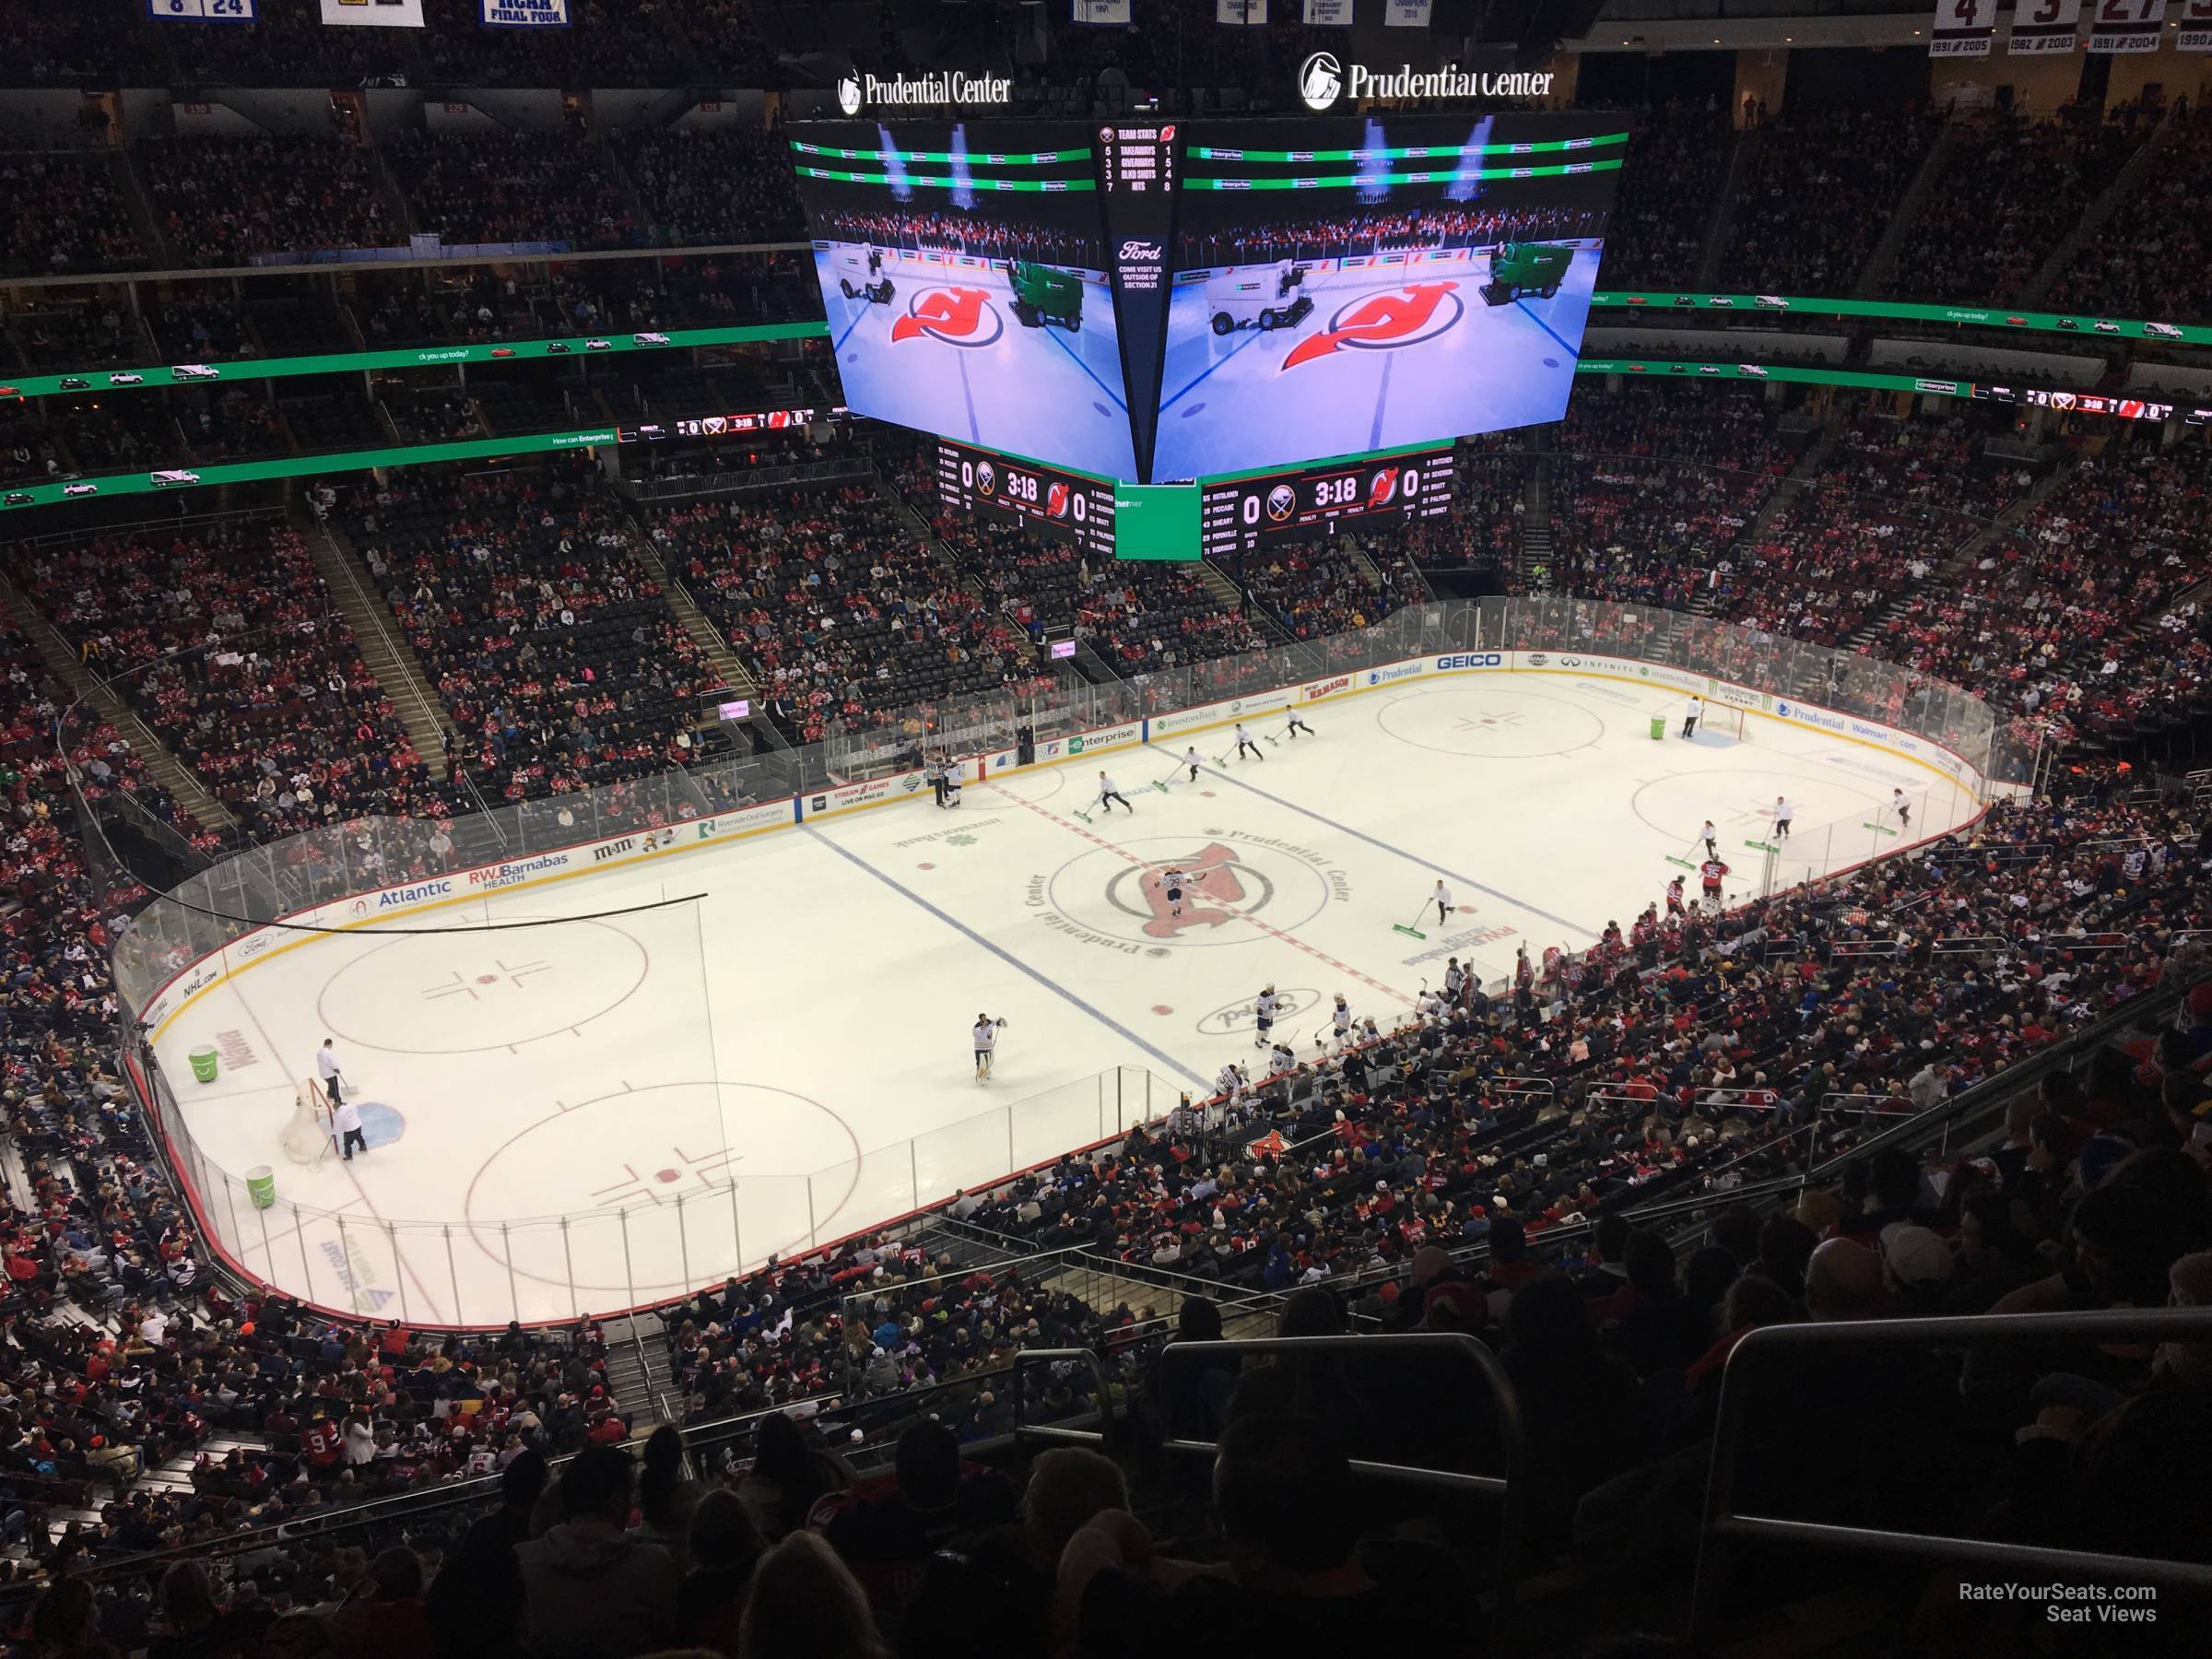 Prudential Center Section 108 - New Jersey Devils ...